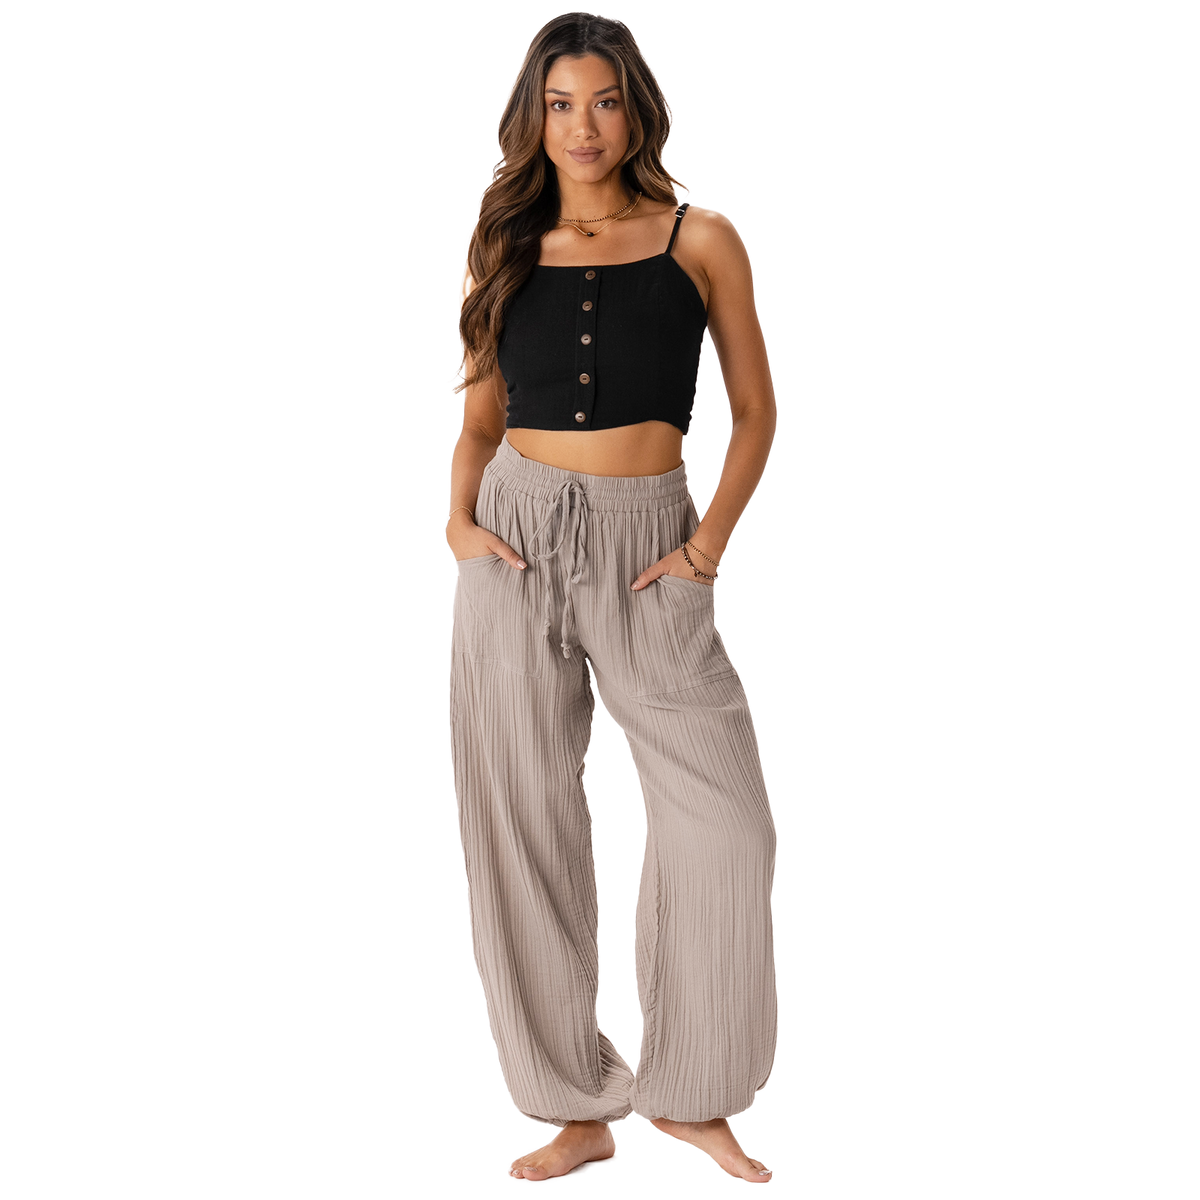 Model wearing stone colored harem pants with a drawstring waistband